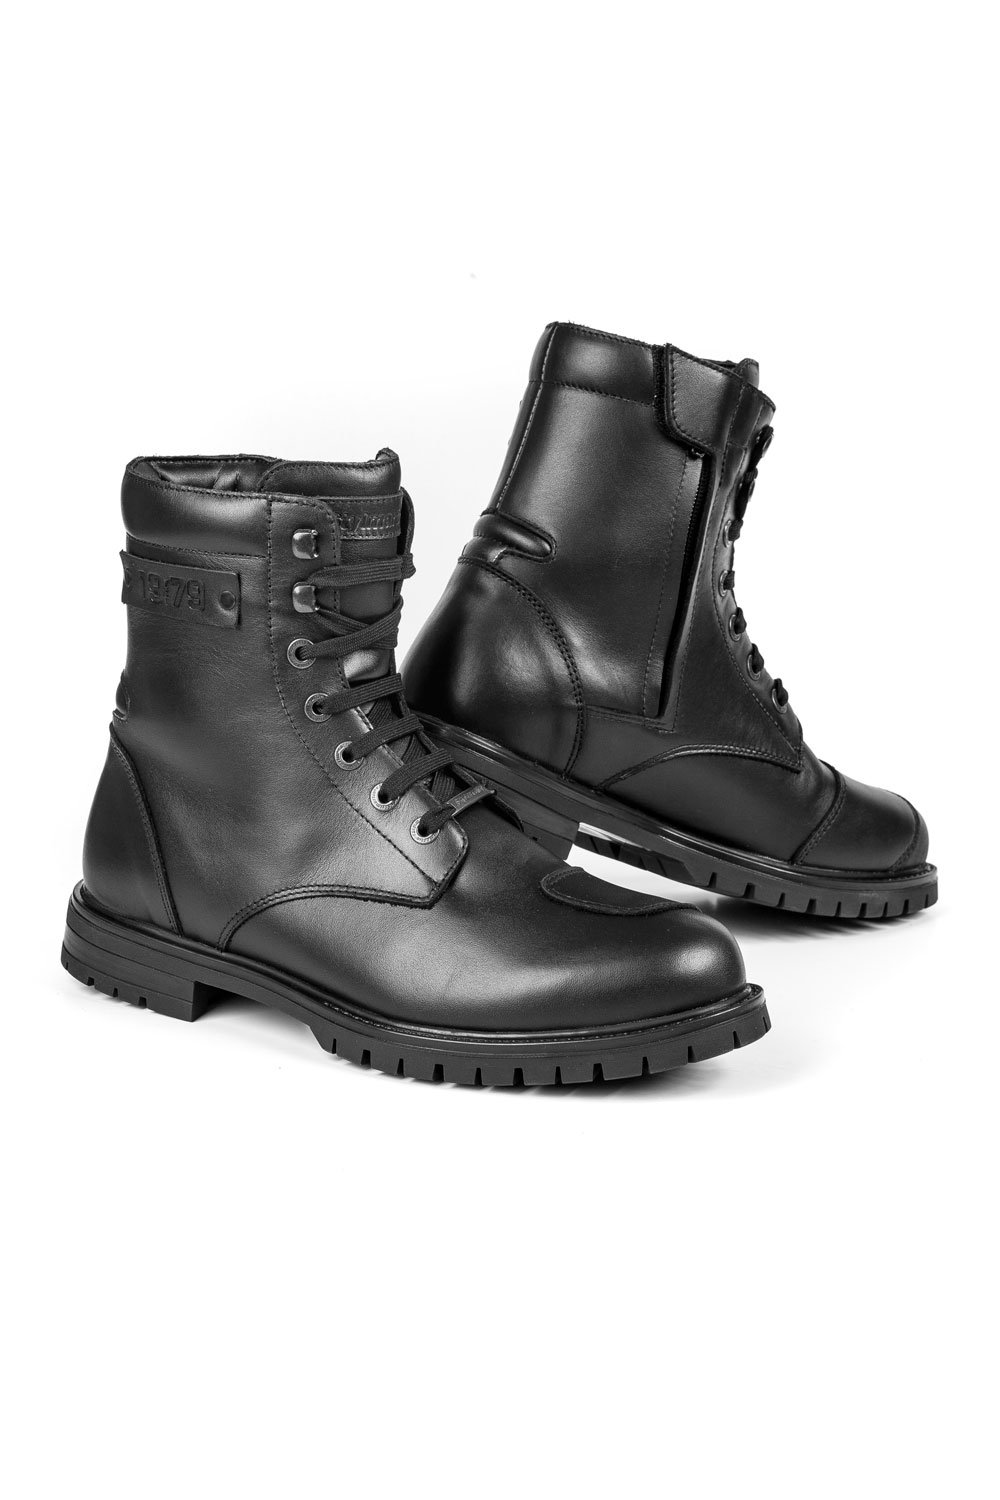 waterproof motorcycle ankle boots